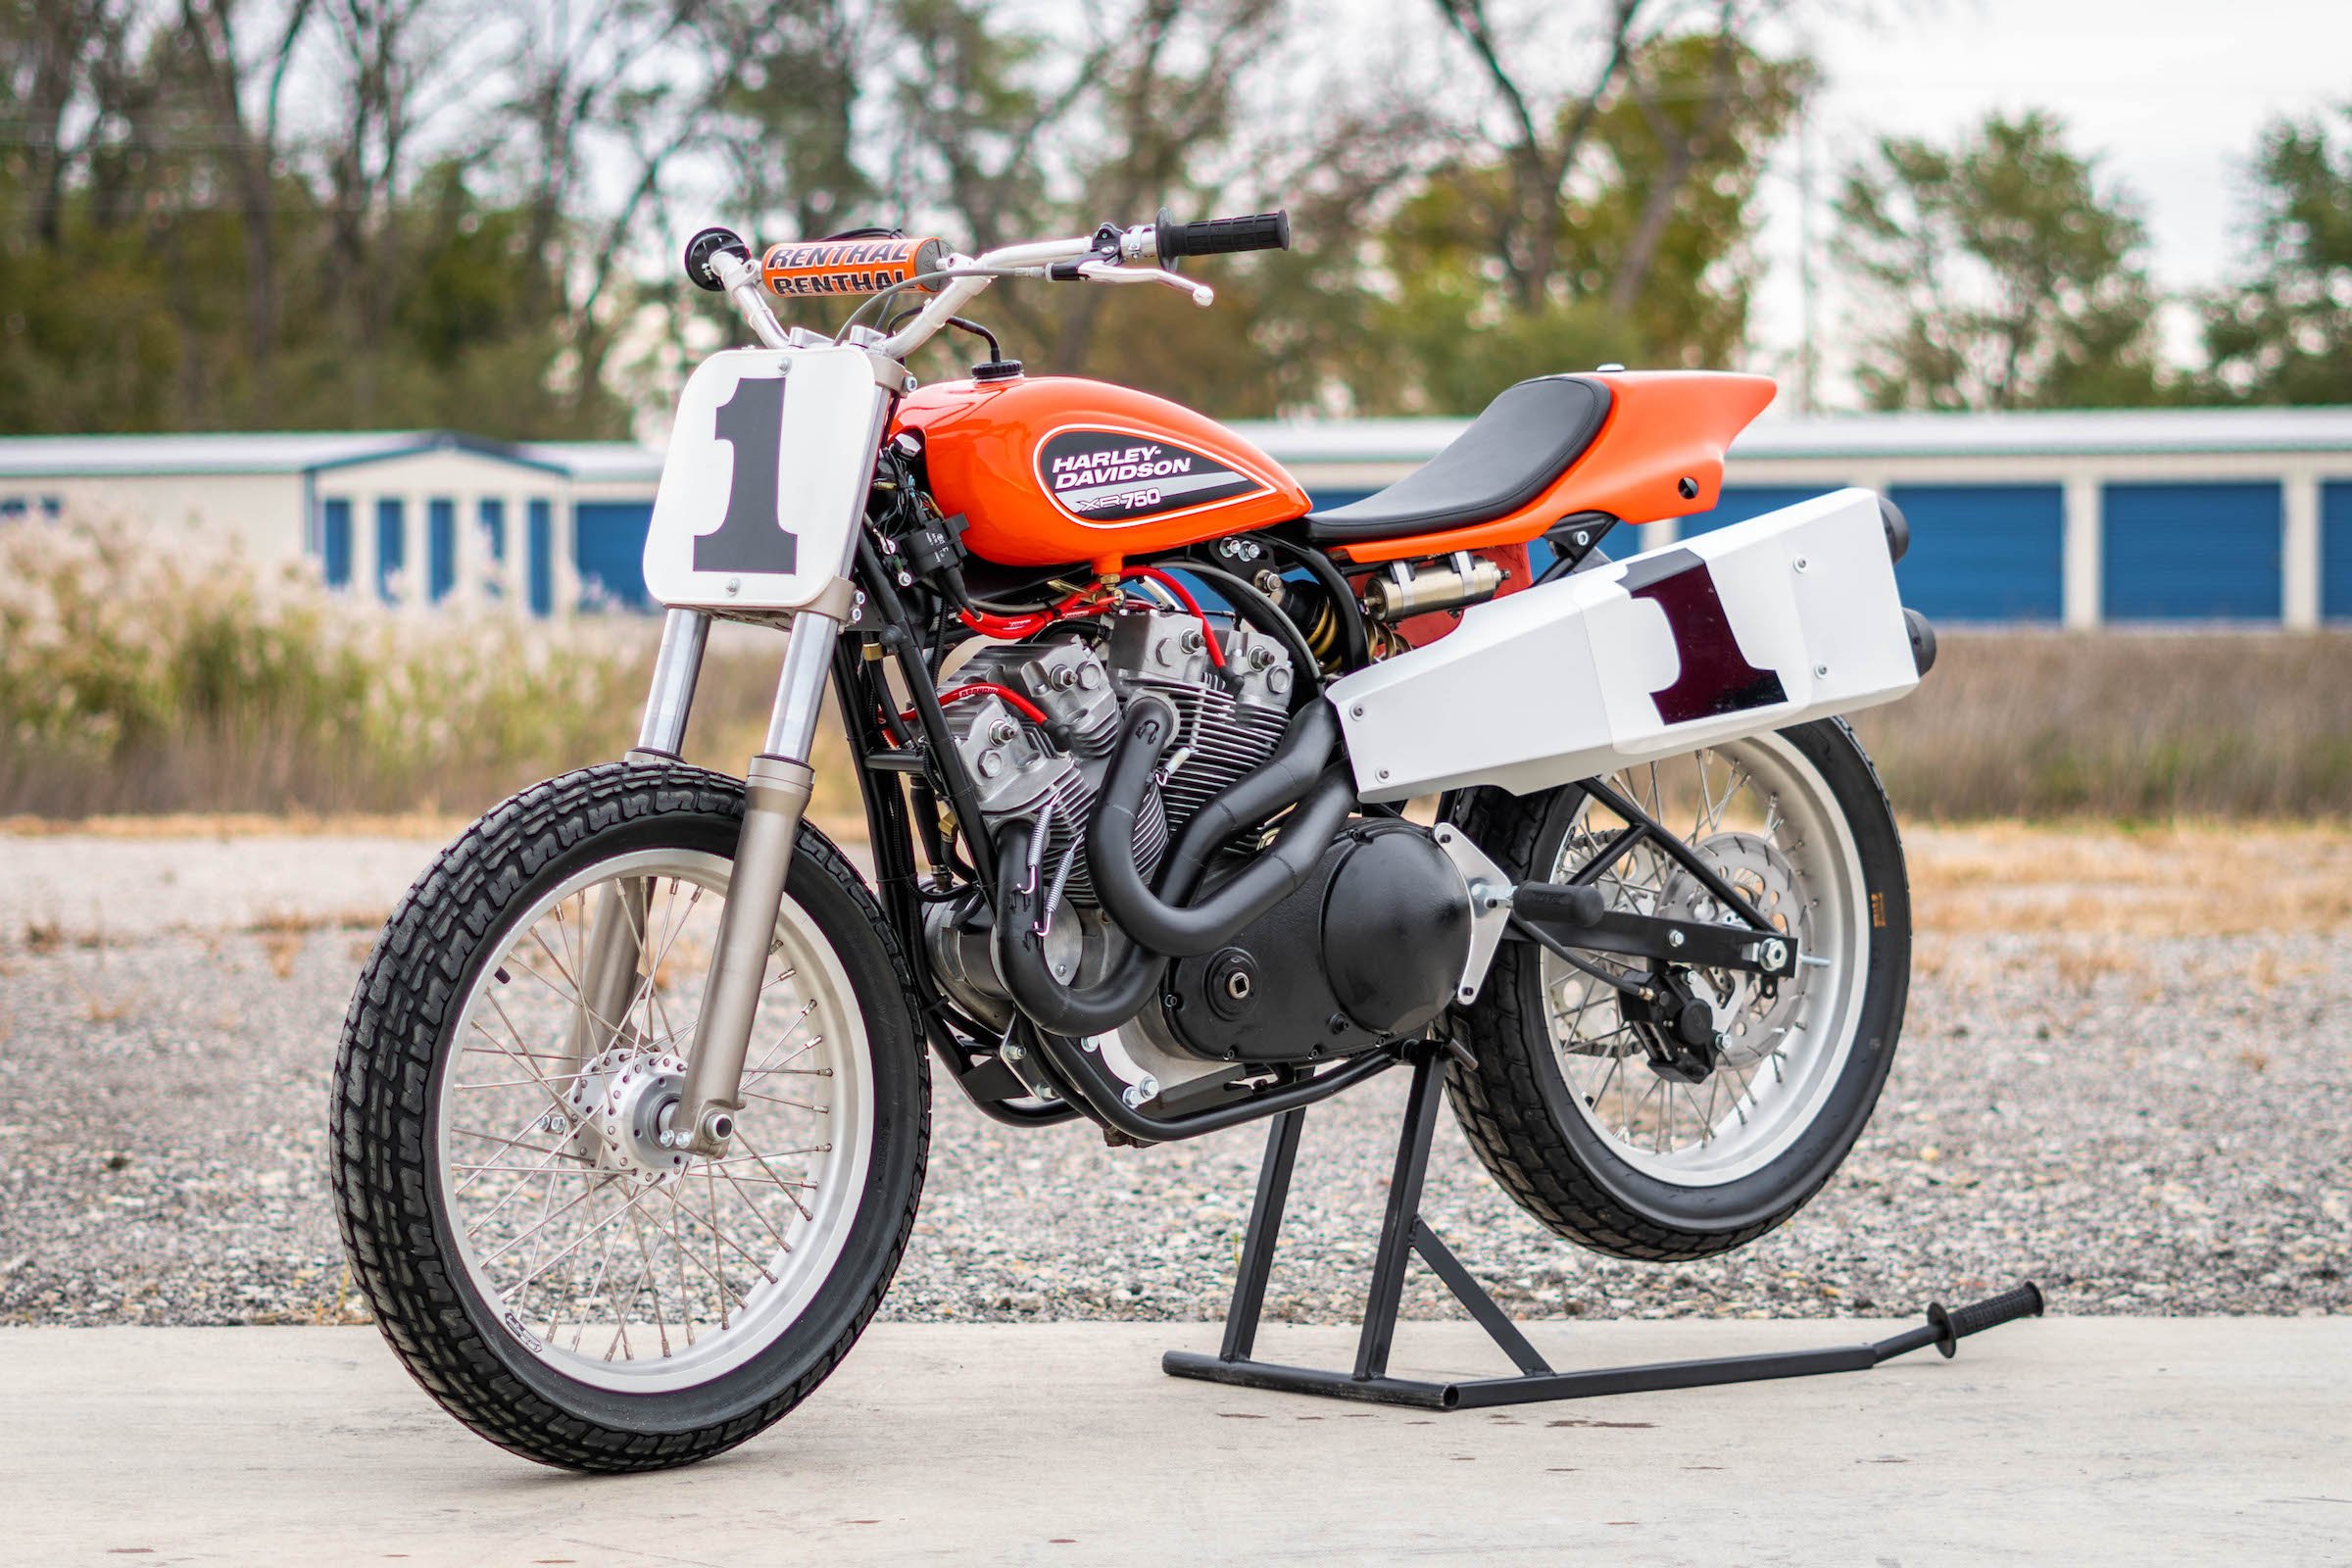  Harley Davidson XR750 A Restored Racer Ready For The 